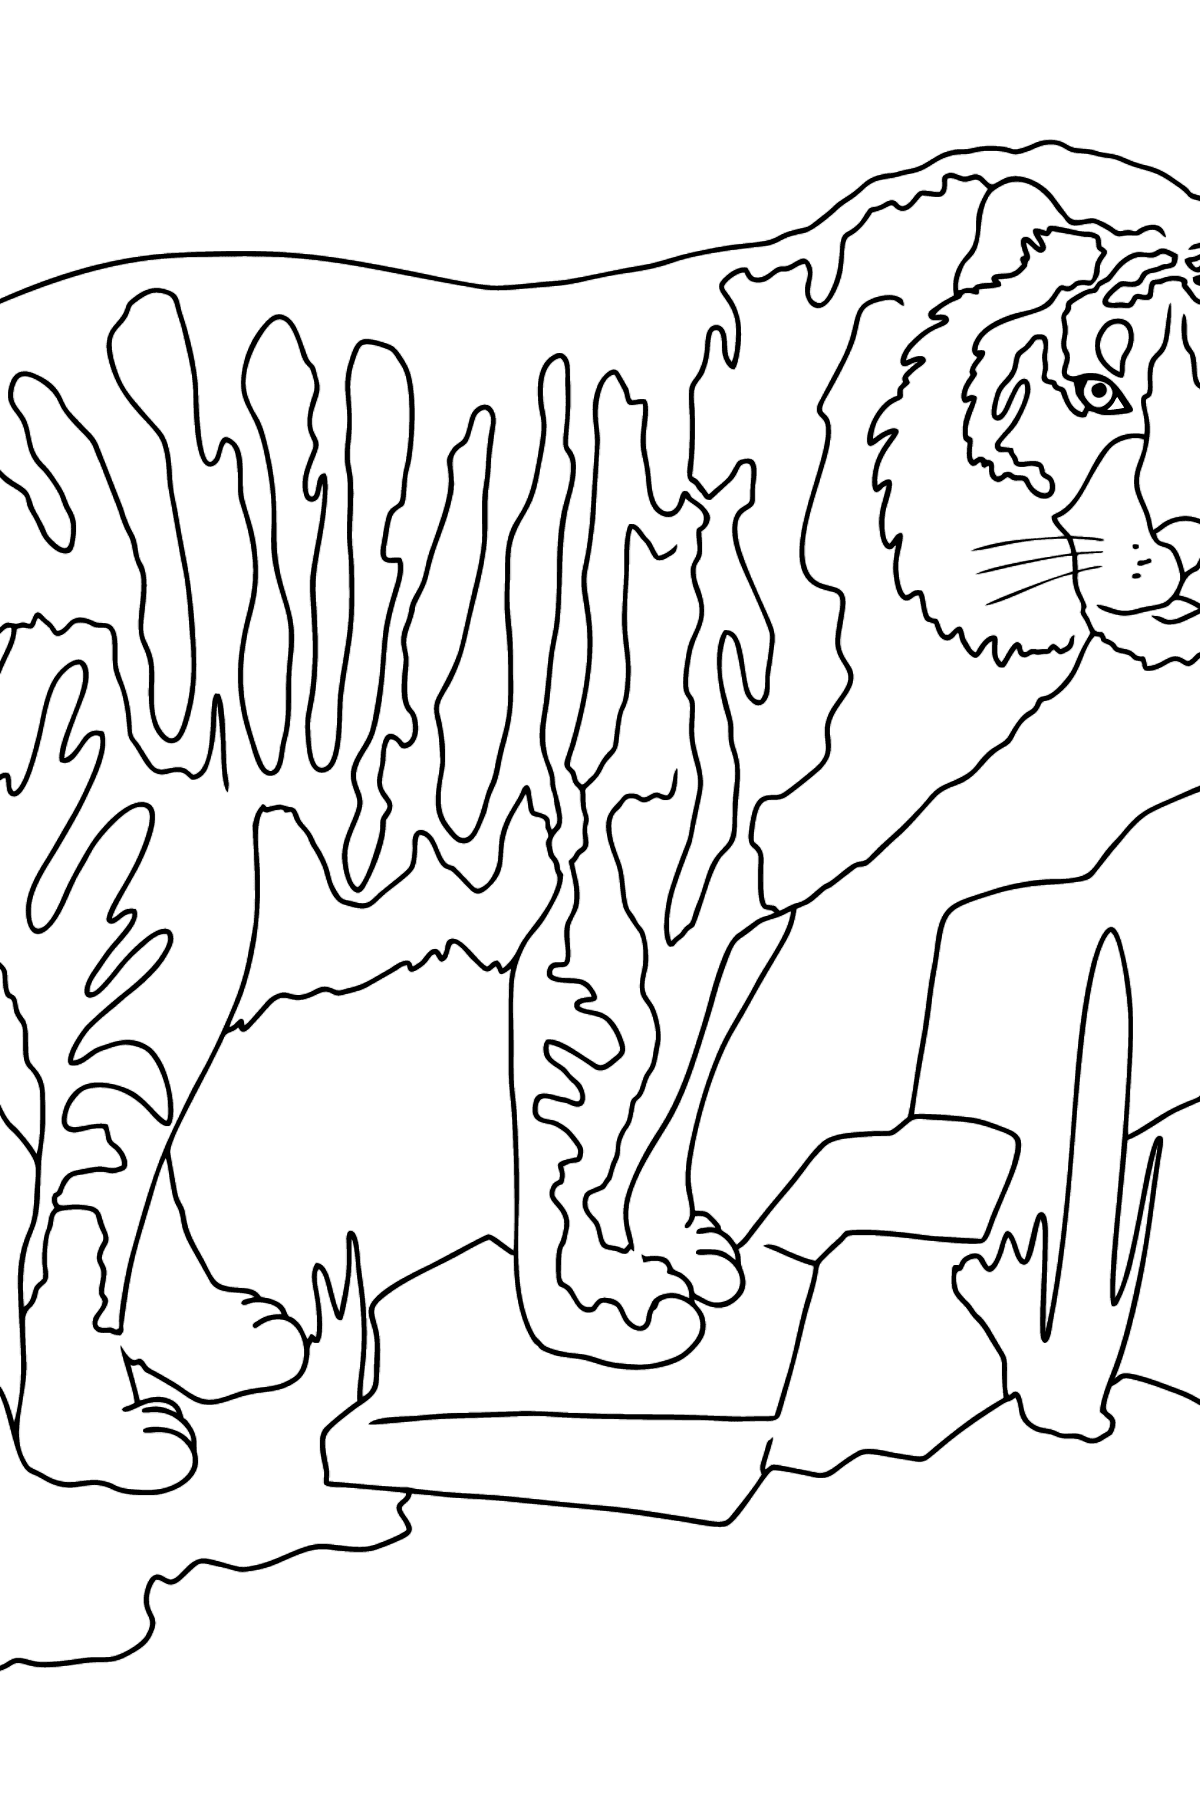 Coloring Page - A Tiger is on a Hunt - Coloring Pages for Kids